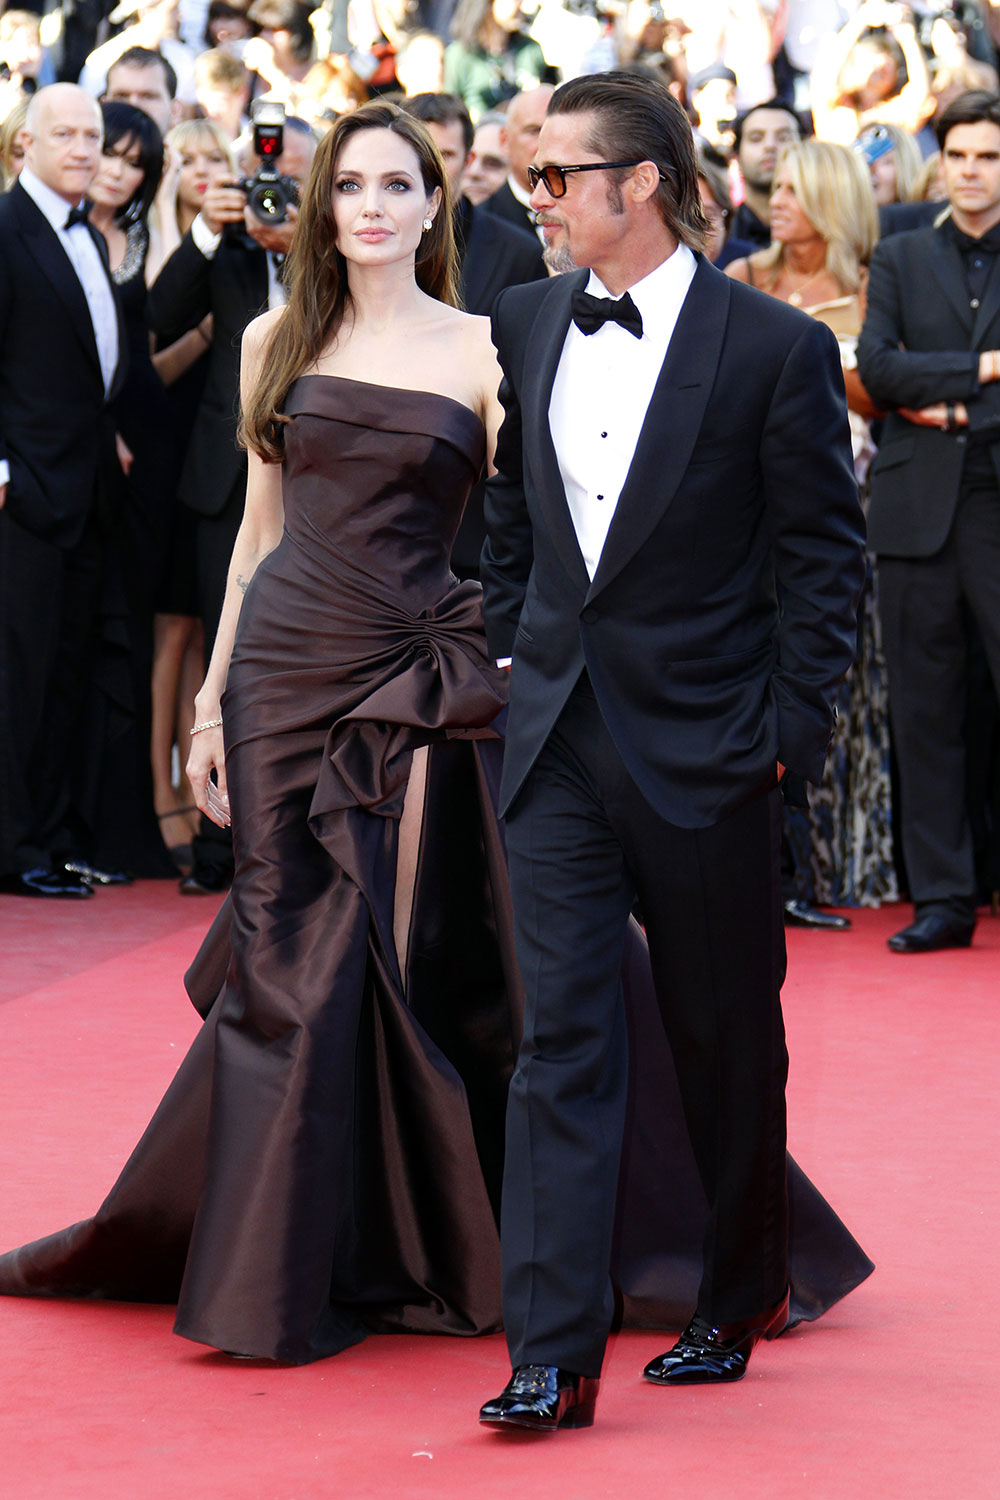 Brad Pitt and Angelina Jolie at the screening of The Tree of Life during the 64th Cannes Film Festival in 2011